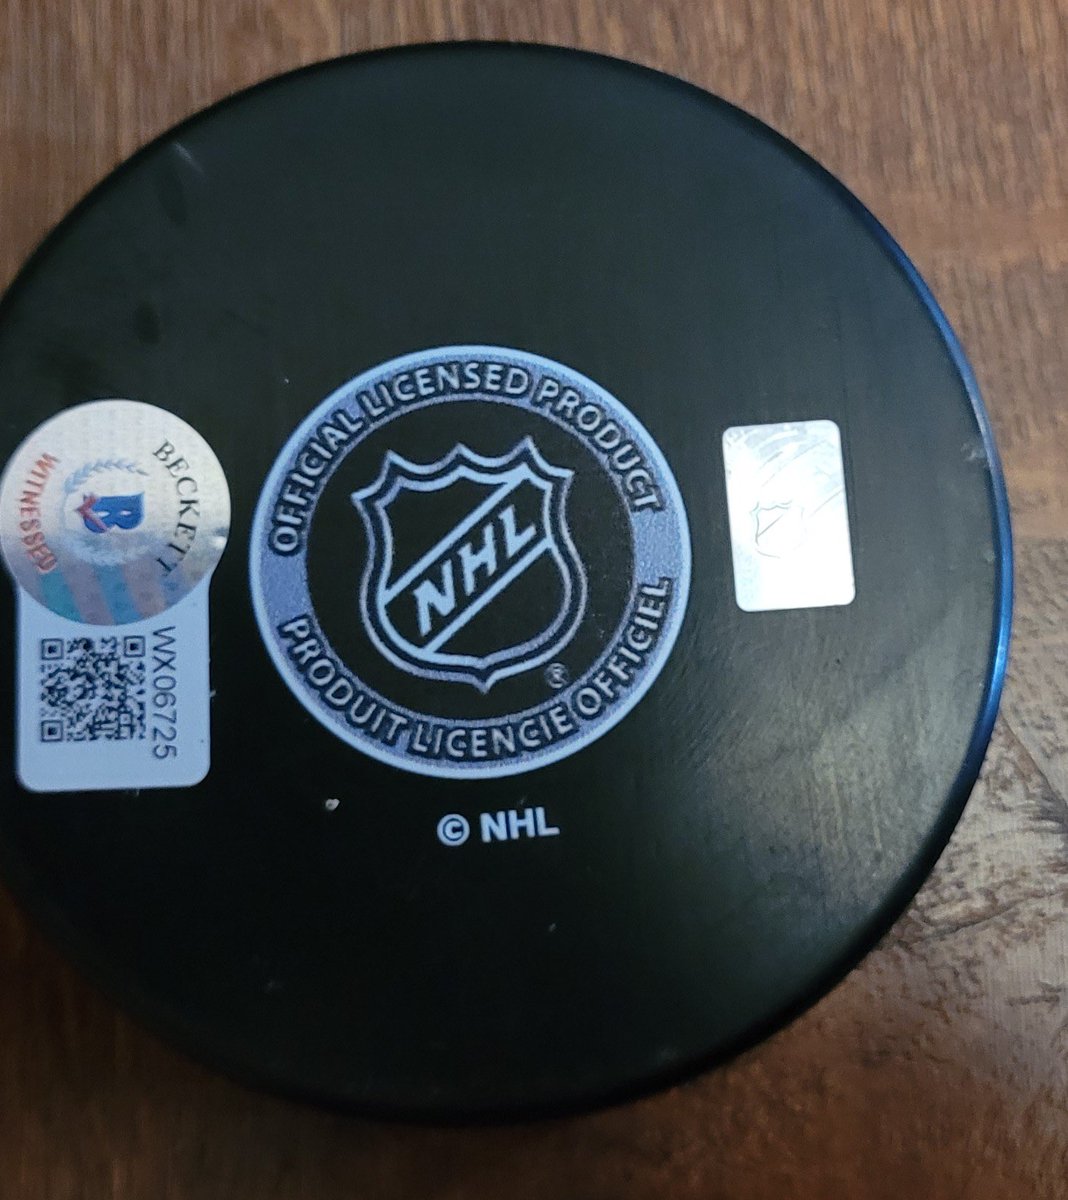 🚨🚨RJ Giveaway 🚨🚨 Buffalo lost a true legend last night. In honor of Rick Jeanneret, @jimmyreu81 and I would like to give away an RJ signed puck. To enter: - Retweet - Follow me - Follow @jimmyreu81 We will announce the winner on September 1st. RIP RJ 💔💔